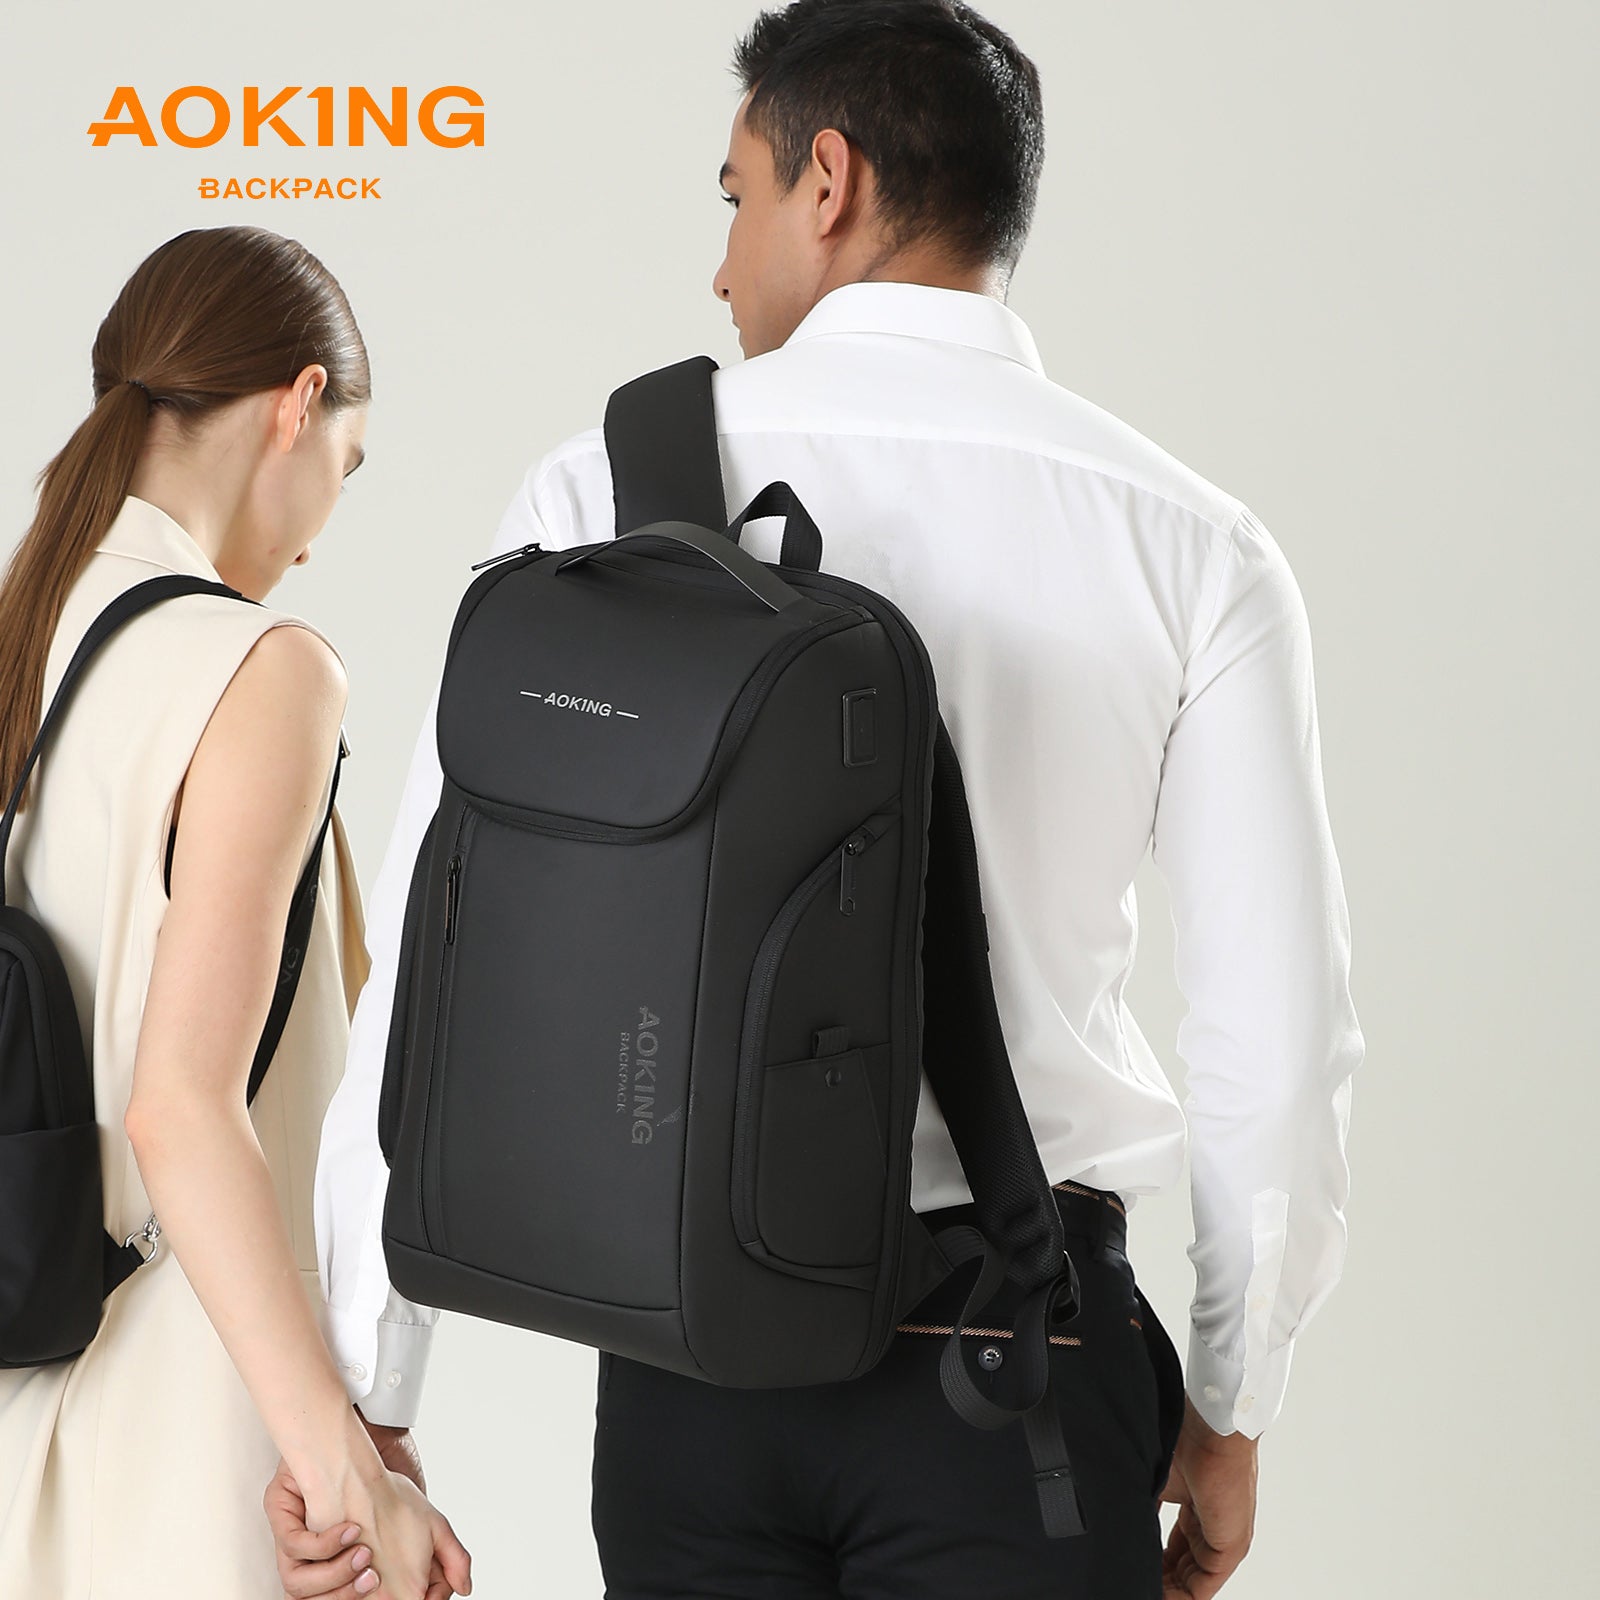 Aoking Fashion Backpack Laptop Business Backpack SN4008